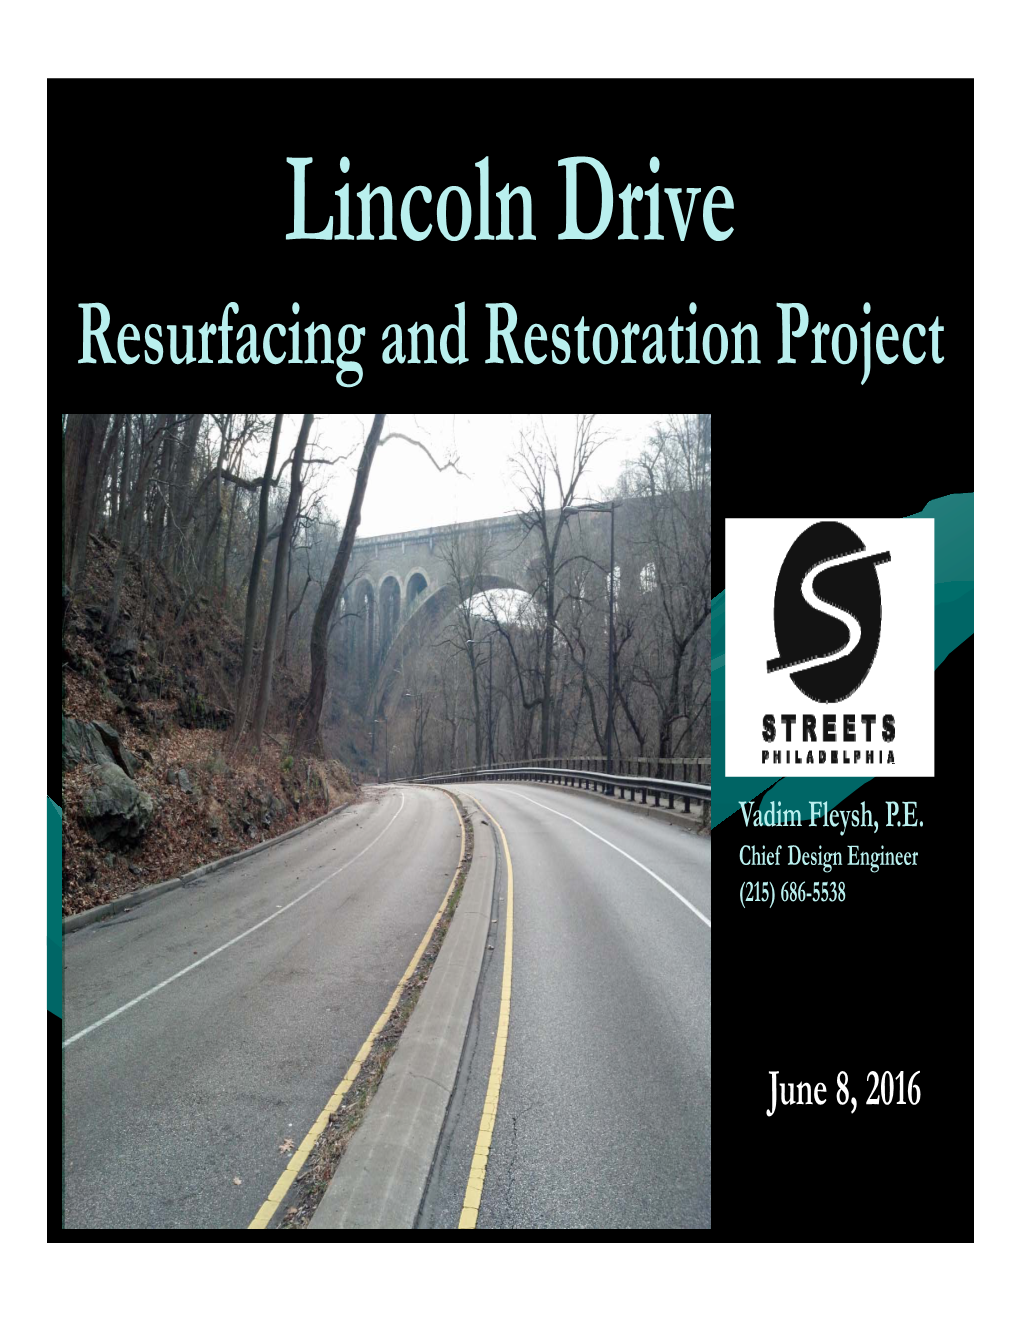 Lincoln Drive Resurfacing and Restoration Project